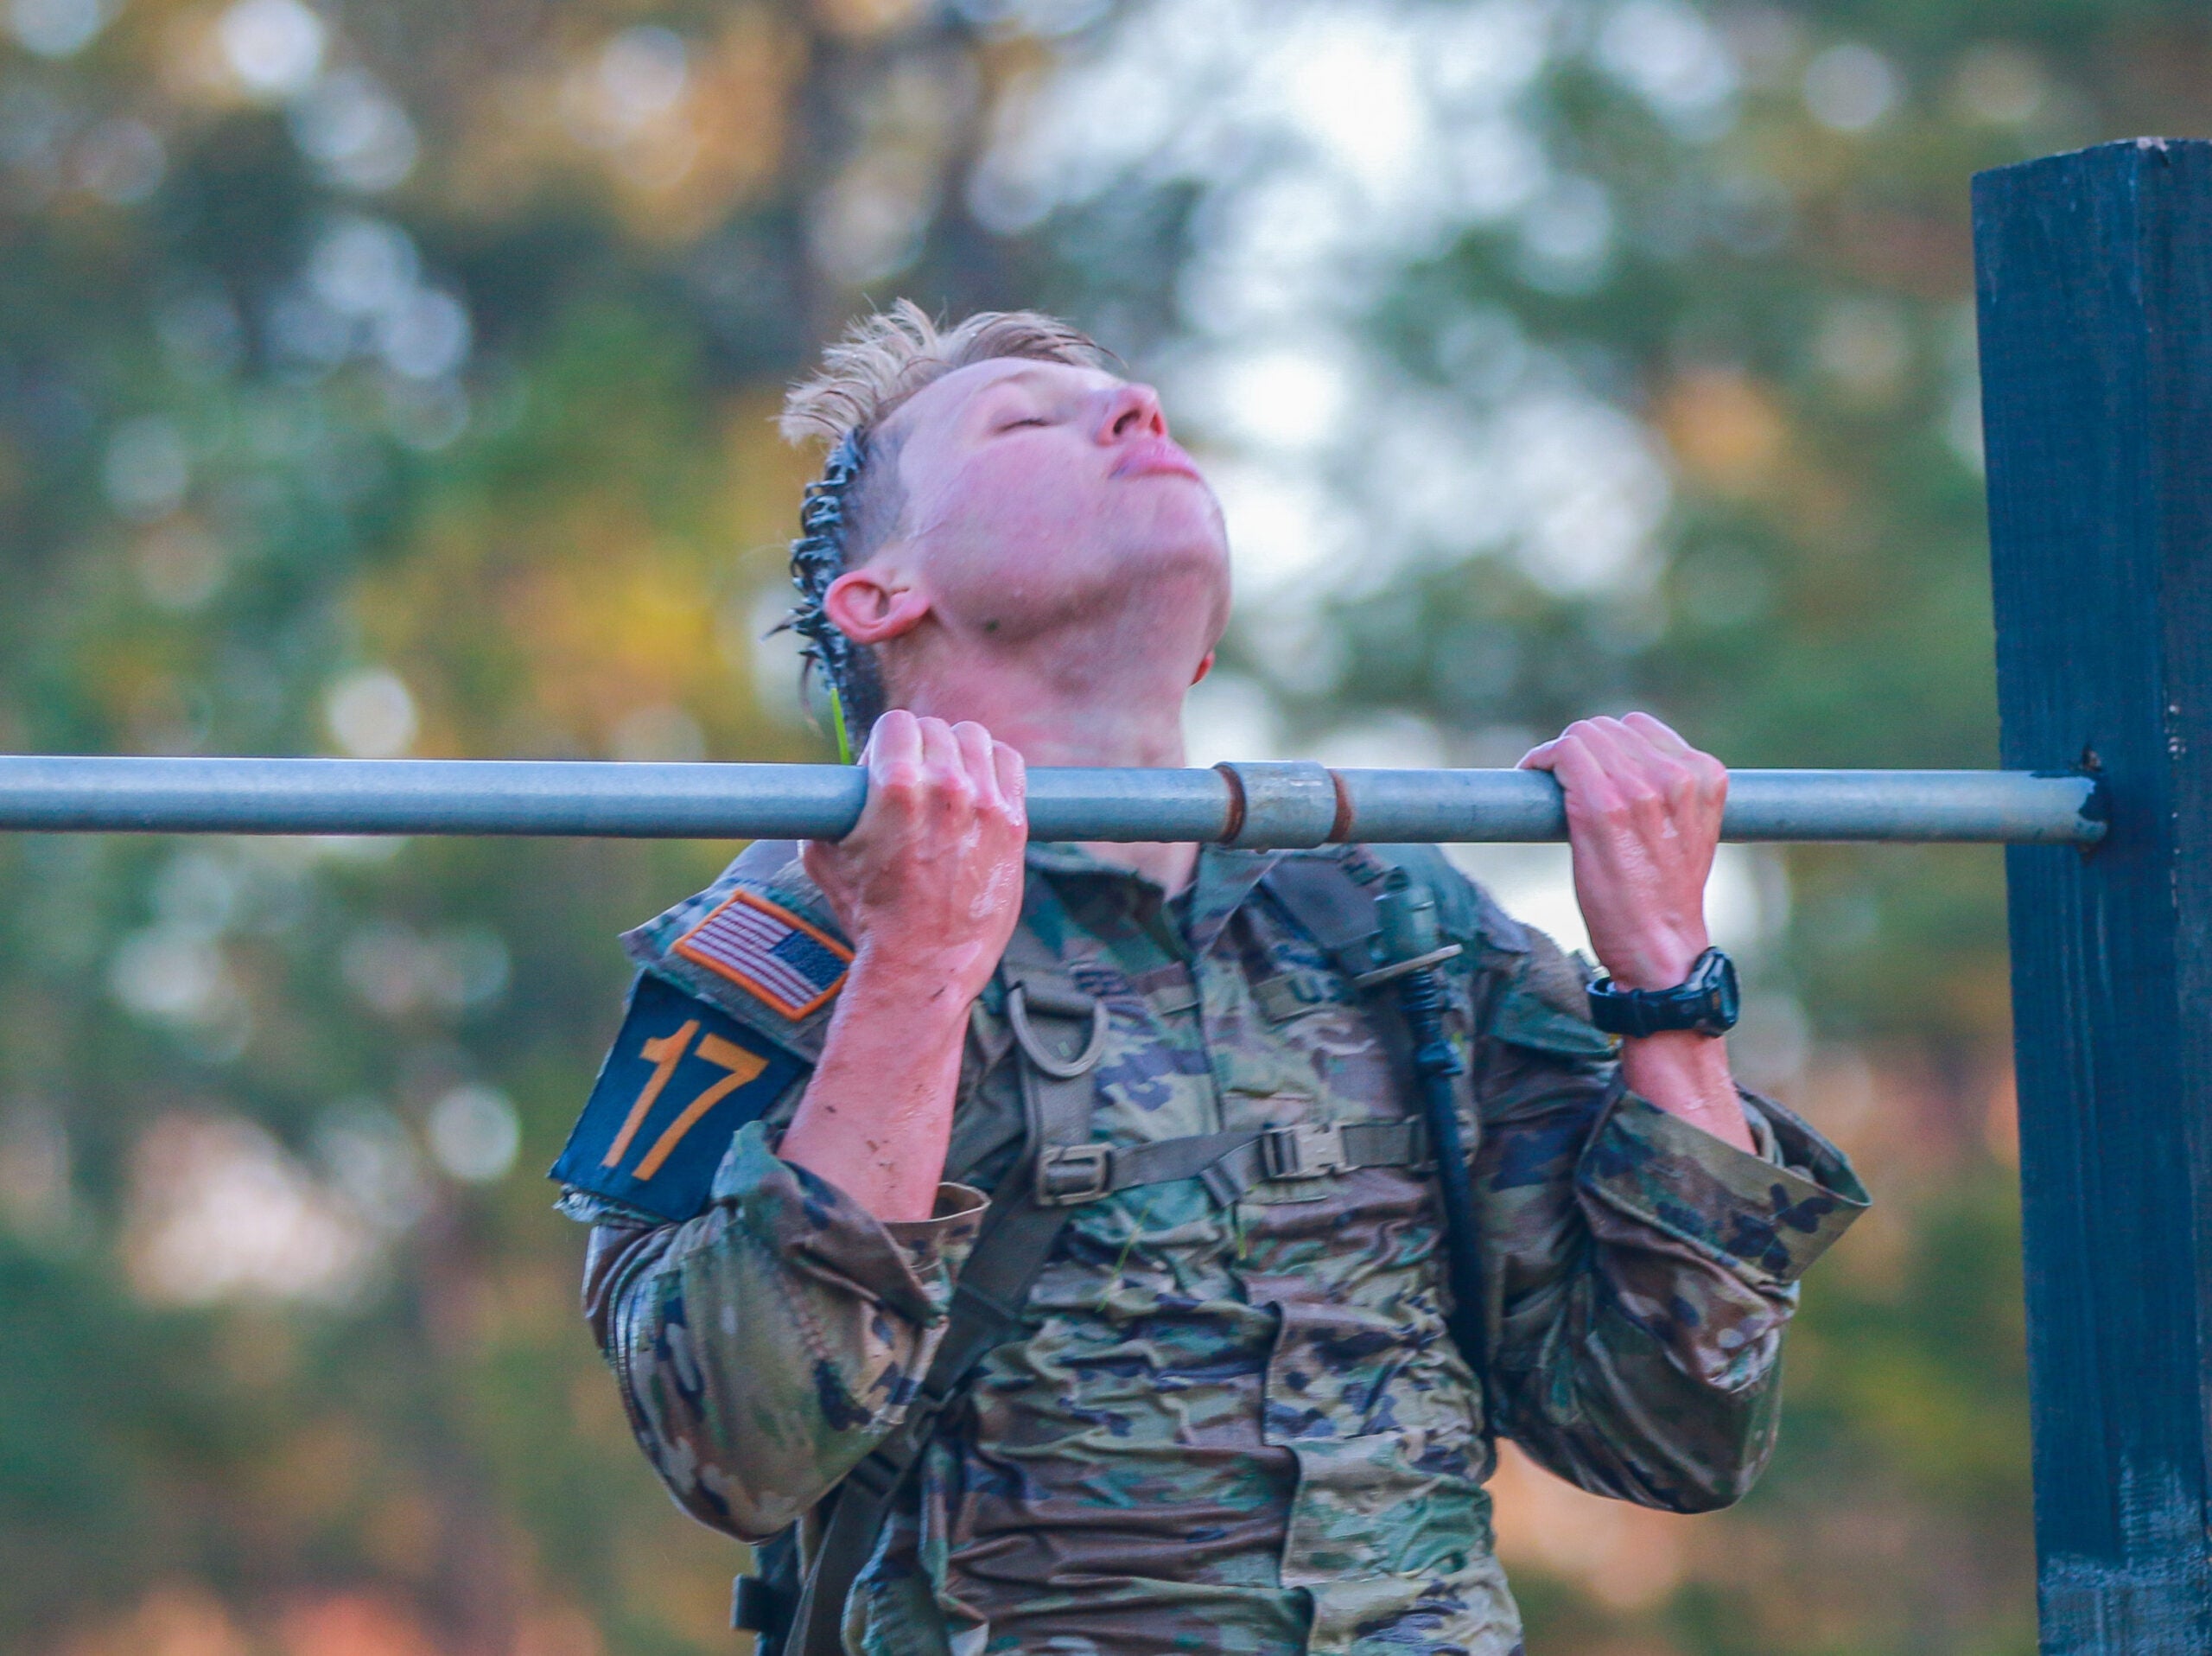 1st Lt. John Greer from the 101st Airborne Division (Air Assault), starts off the first obstacle course of the Annual Best Ranger Competition in Fort Benning, Ga on April  8th, 2022.  Three long days and nights of events that challenges physical, mental and technical skills. Four teams of two of 101st soldiers came to compete with the top rangers around the world in the Best Ranger Competition on April 8-10.